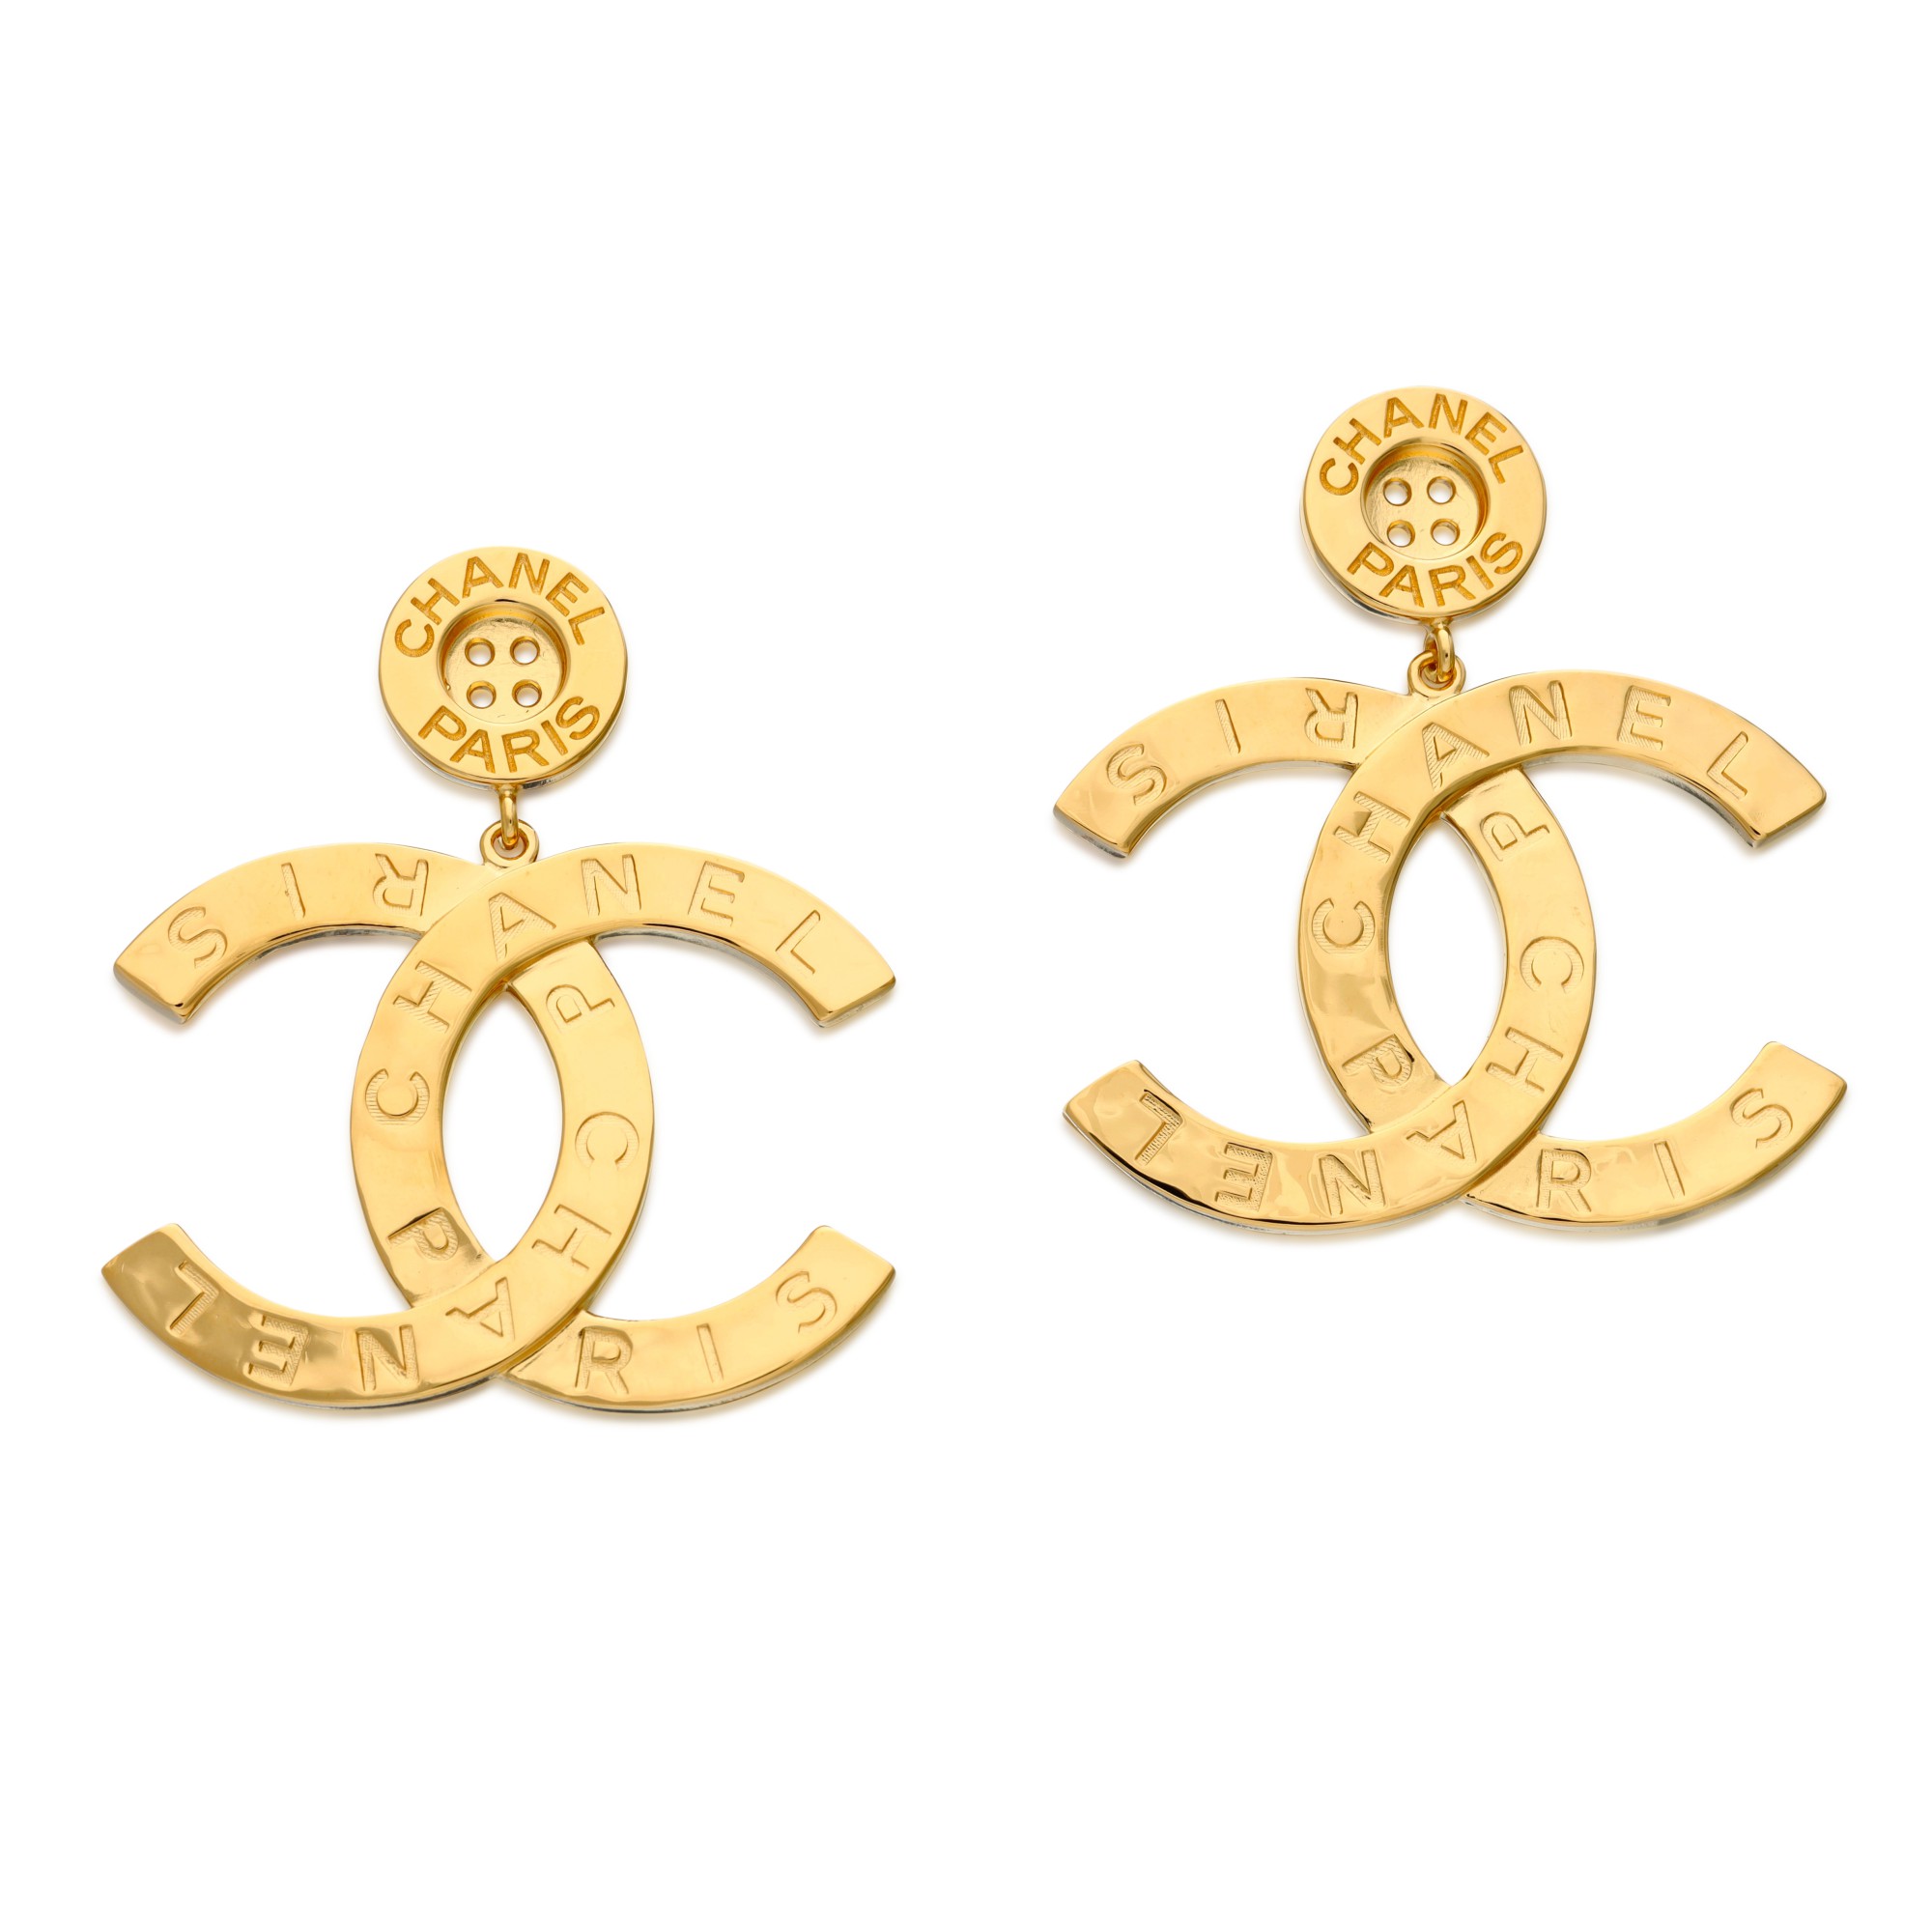 The Opulence and Glamour of Chanel Earrings  Handbags and Accessories   Sothebys